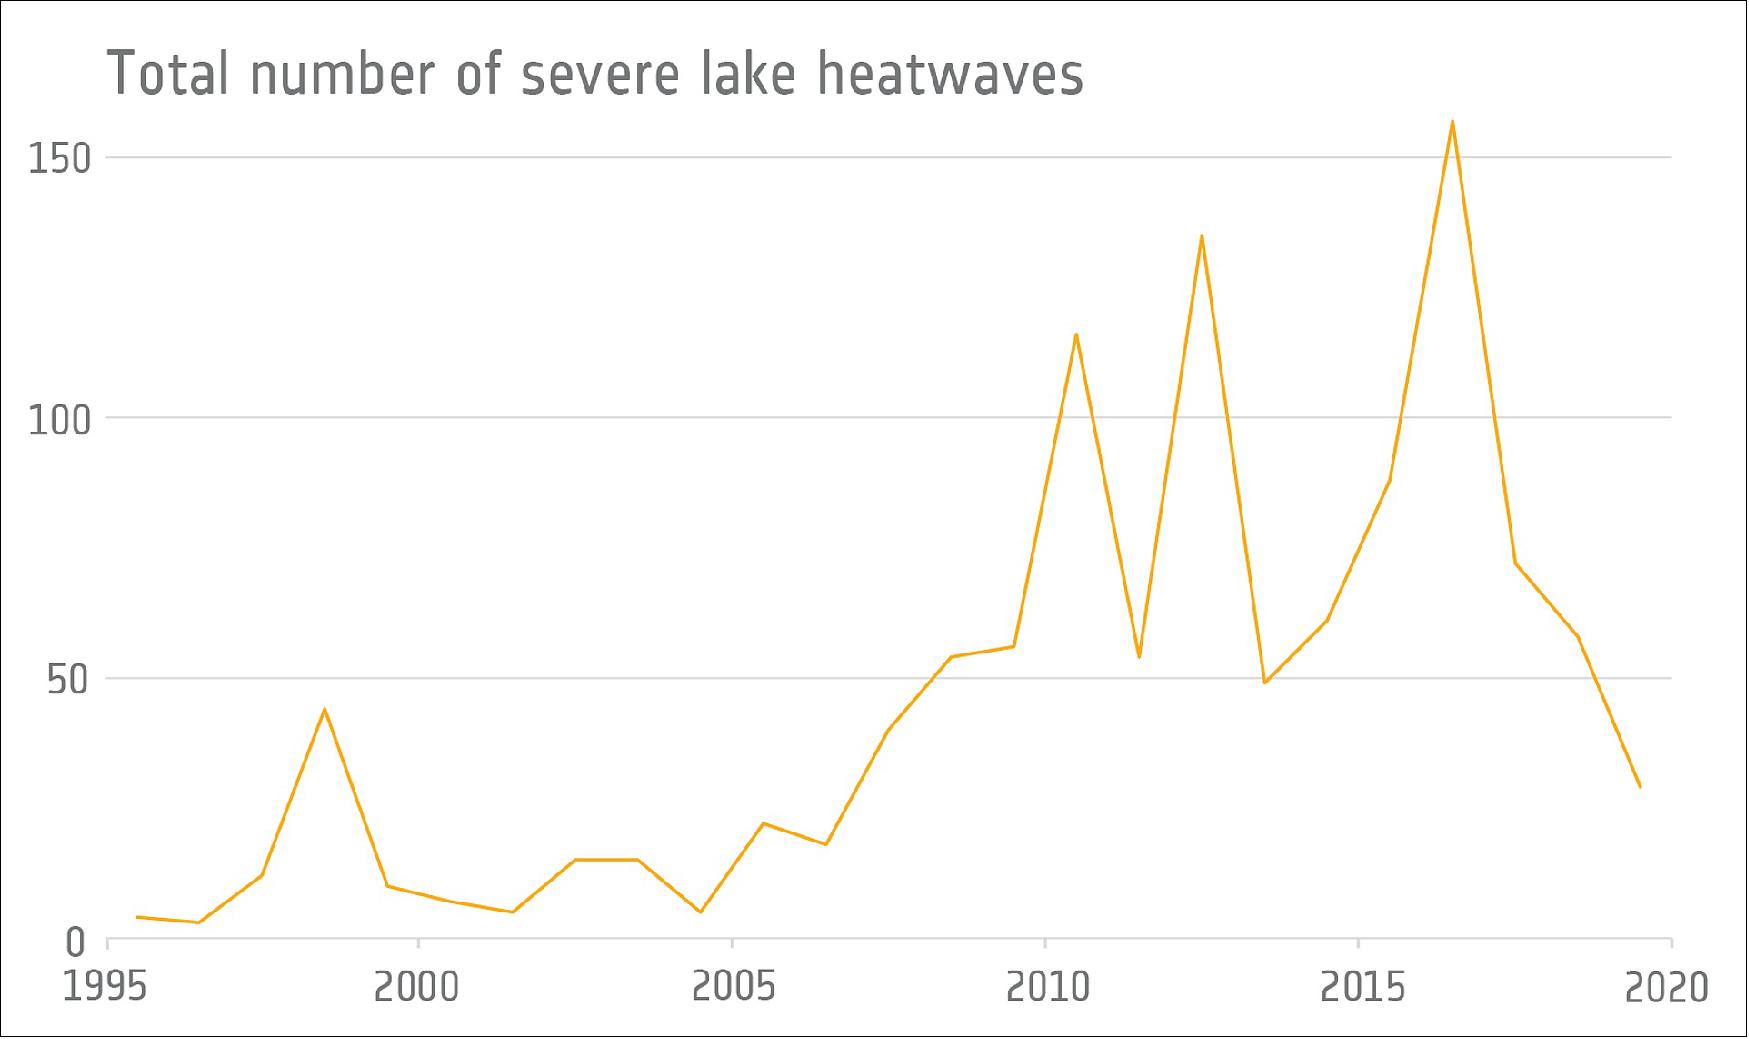 Figure 2: The total number of severe lake heatwaves detected from 1995 to 2019 [image credit: ESA (Data: Woolway et al., 2022)]